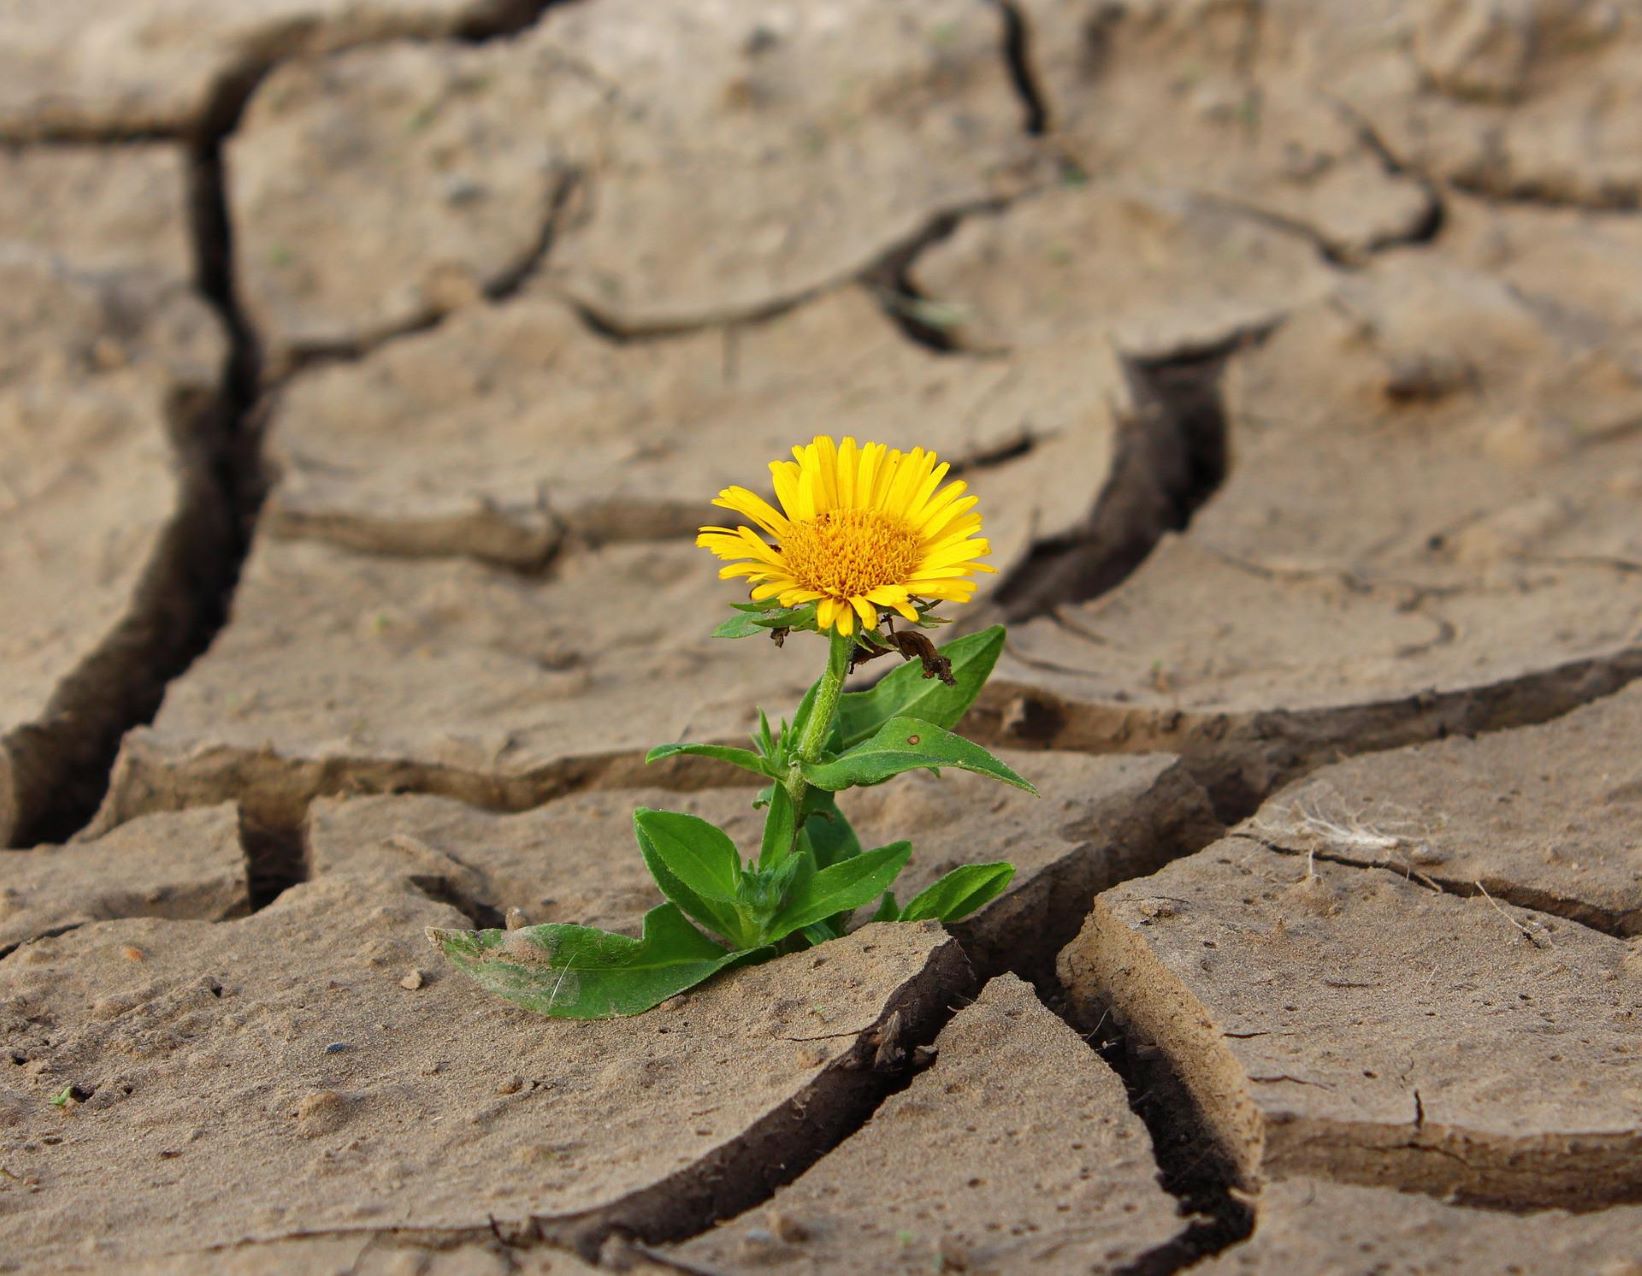 Flower Survives in cracked clay